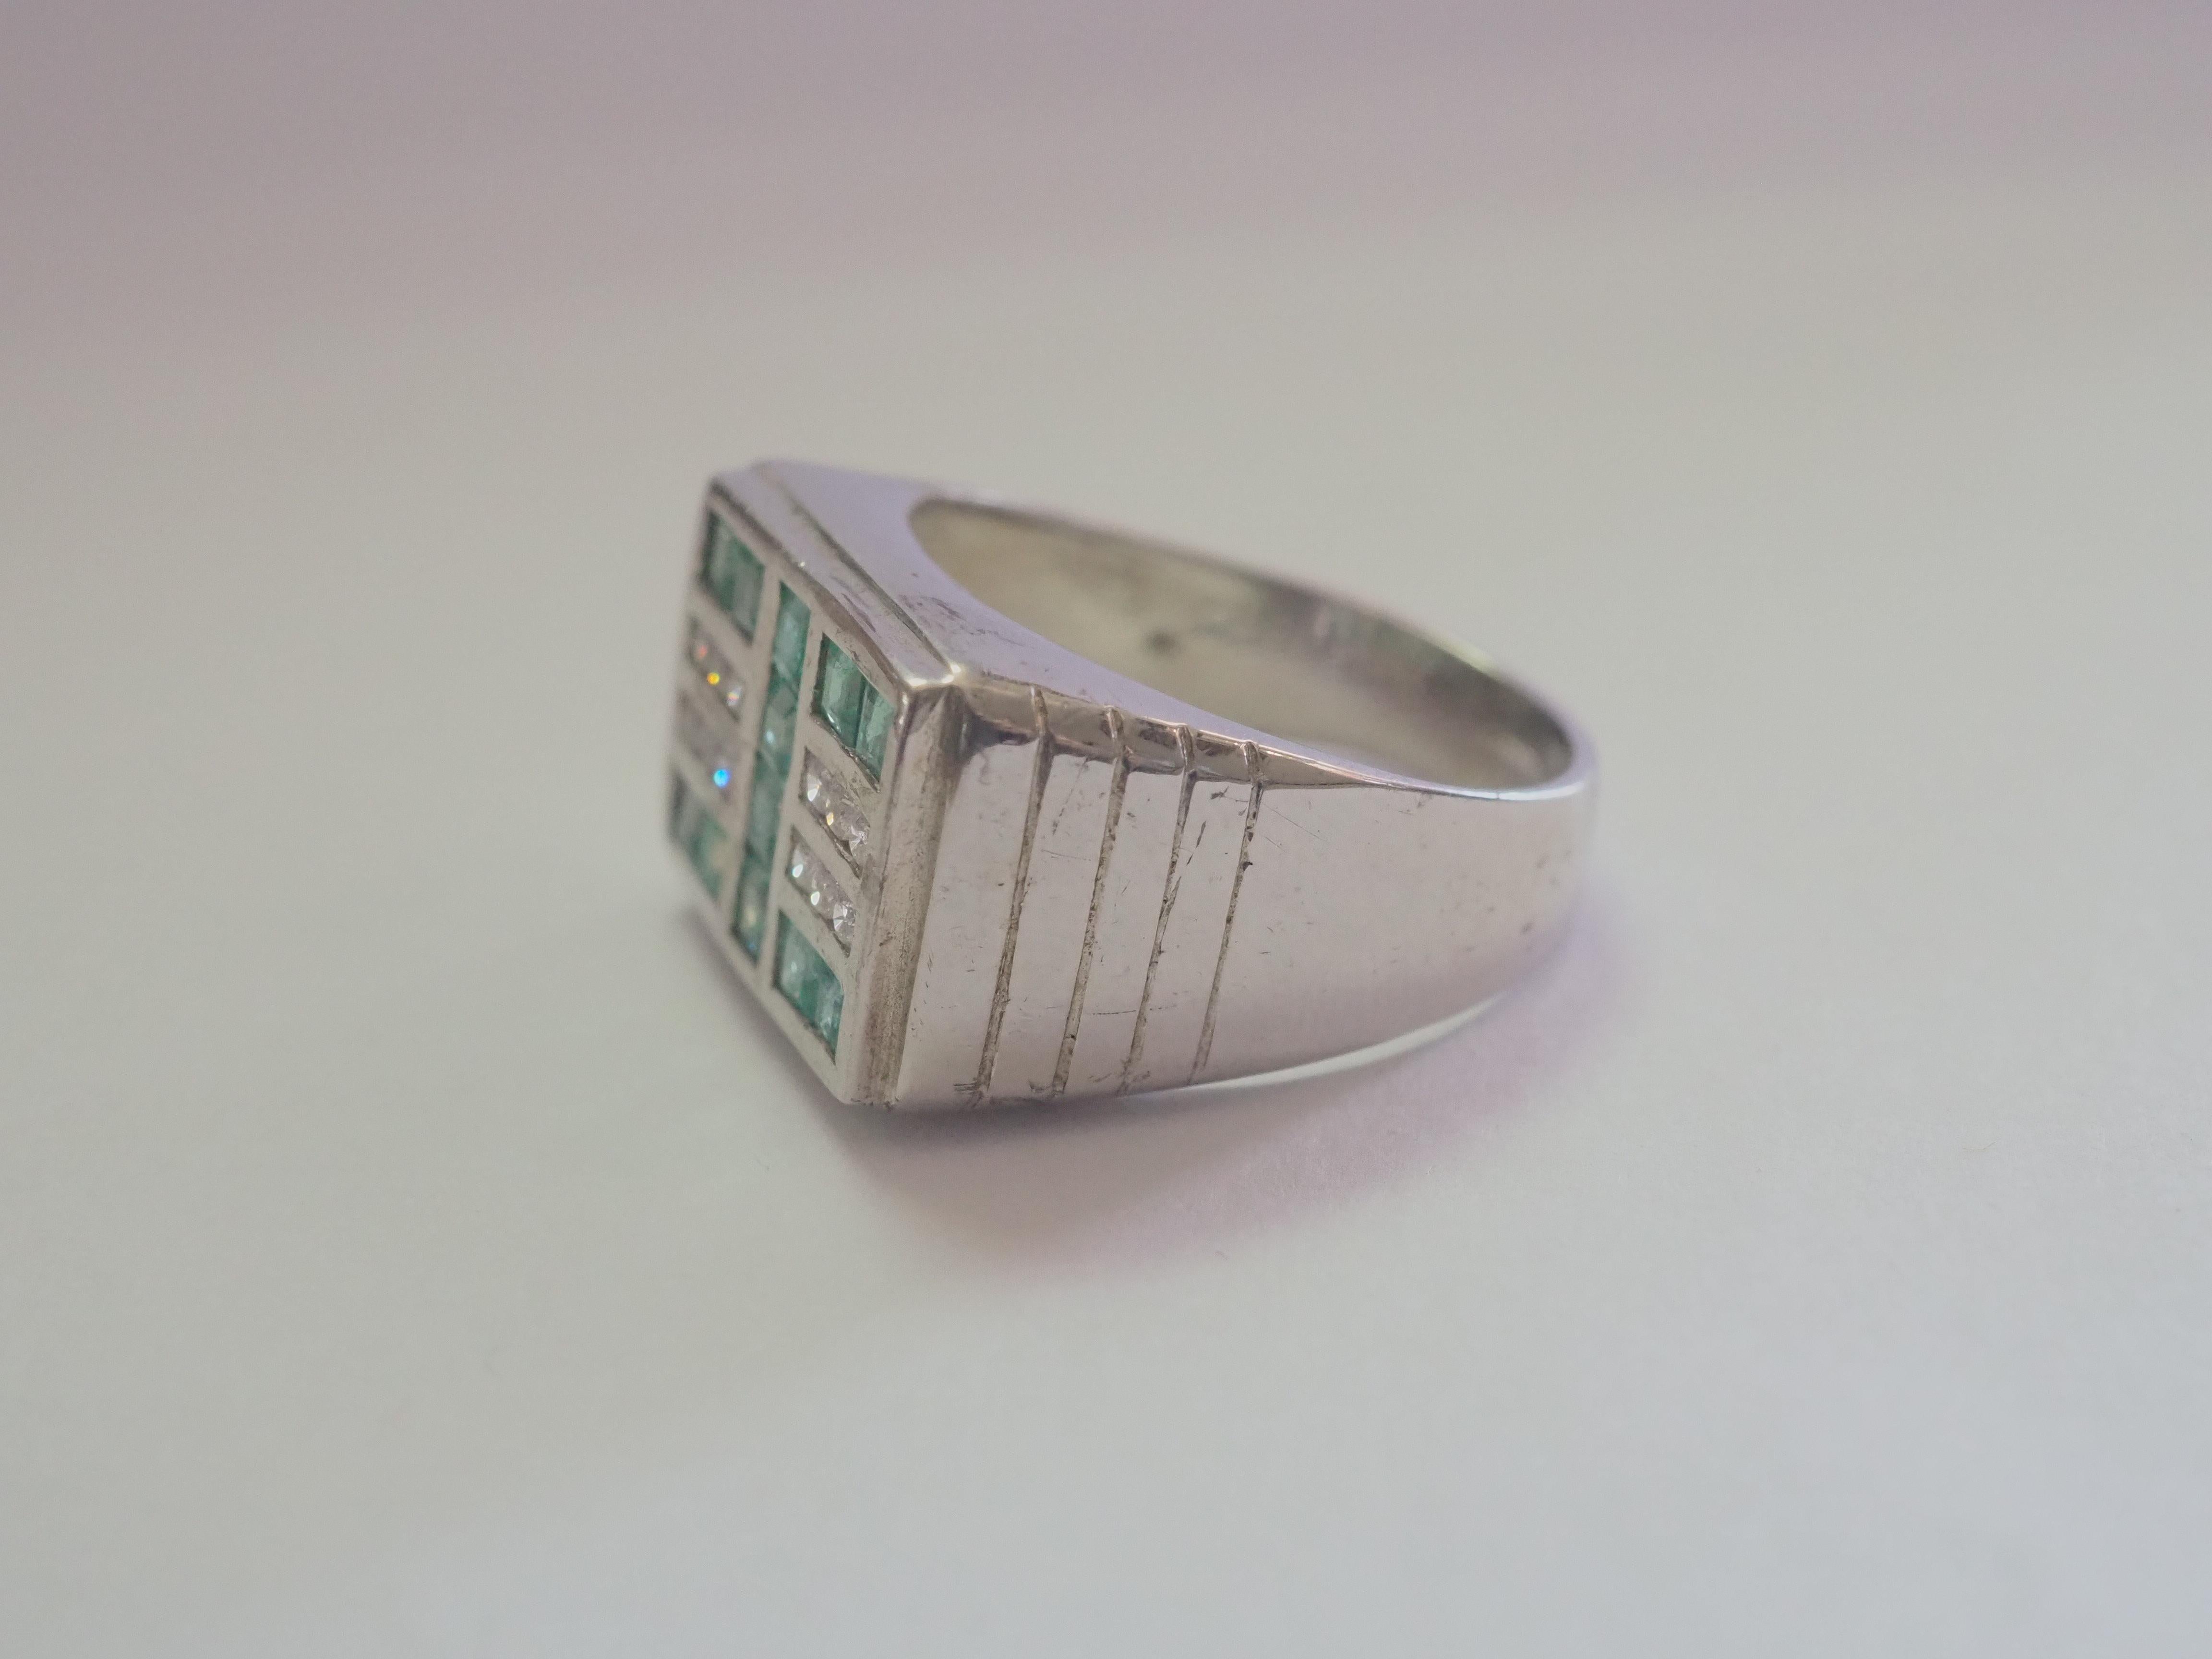 This ring is a Stunning men's band ring in solid sterling silver. The ring is decorated by natural and decent squared emeralds inlaid beautifully. The white stones are on each end are Cubic Zirconia. The emerald gemstone is one of the most popular